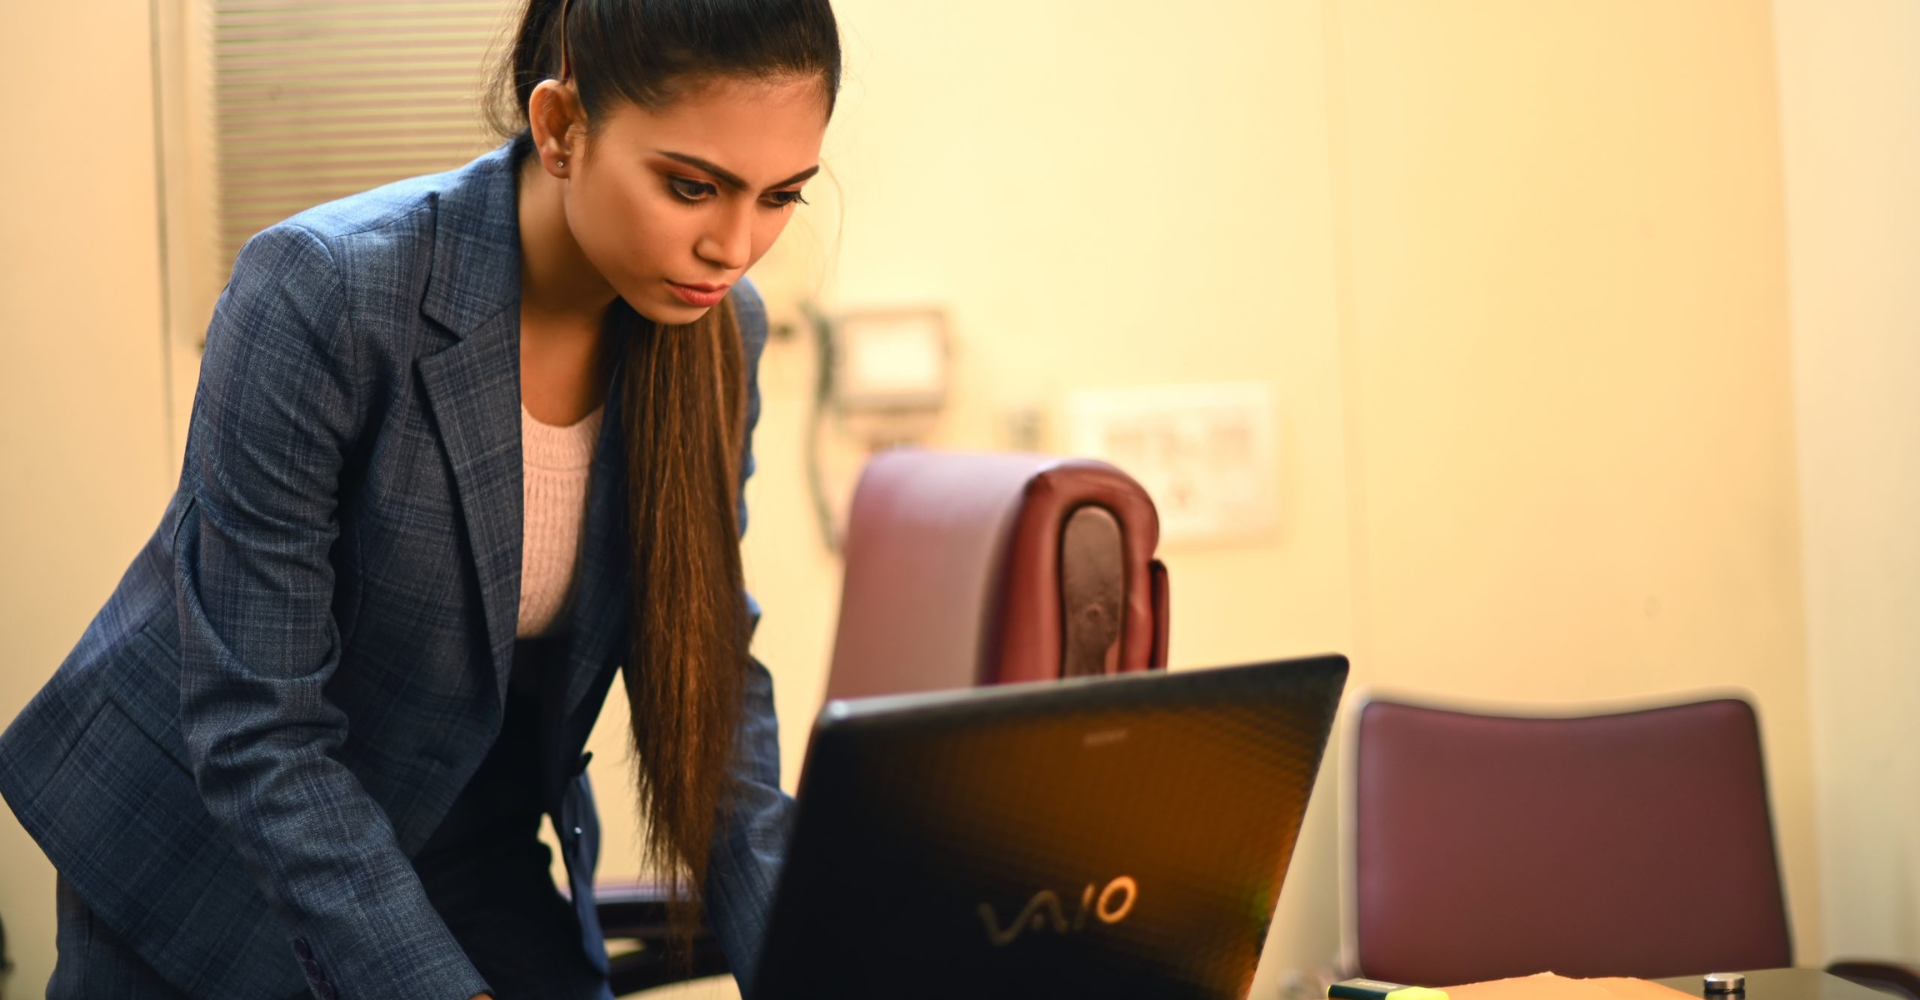 A woman in a suit is standing in front of a laptop computer.